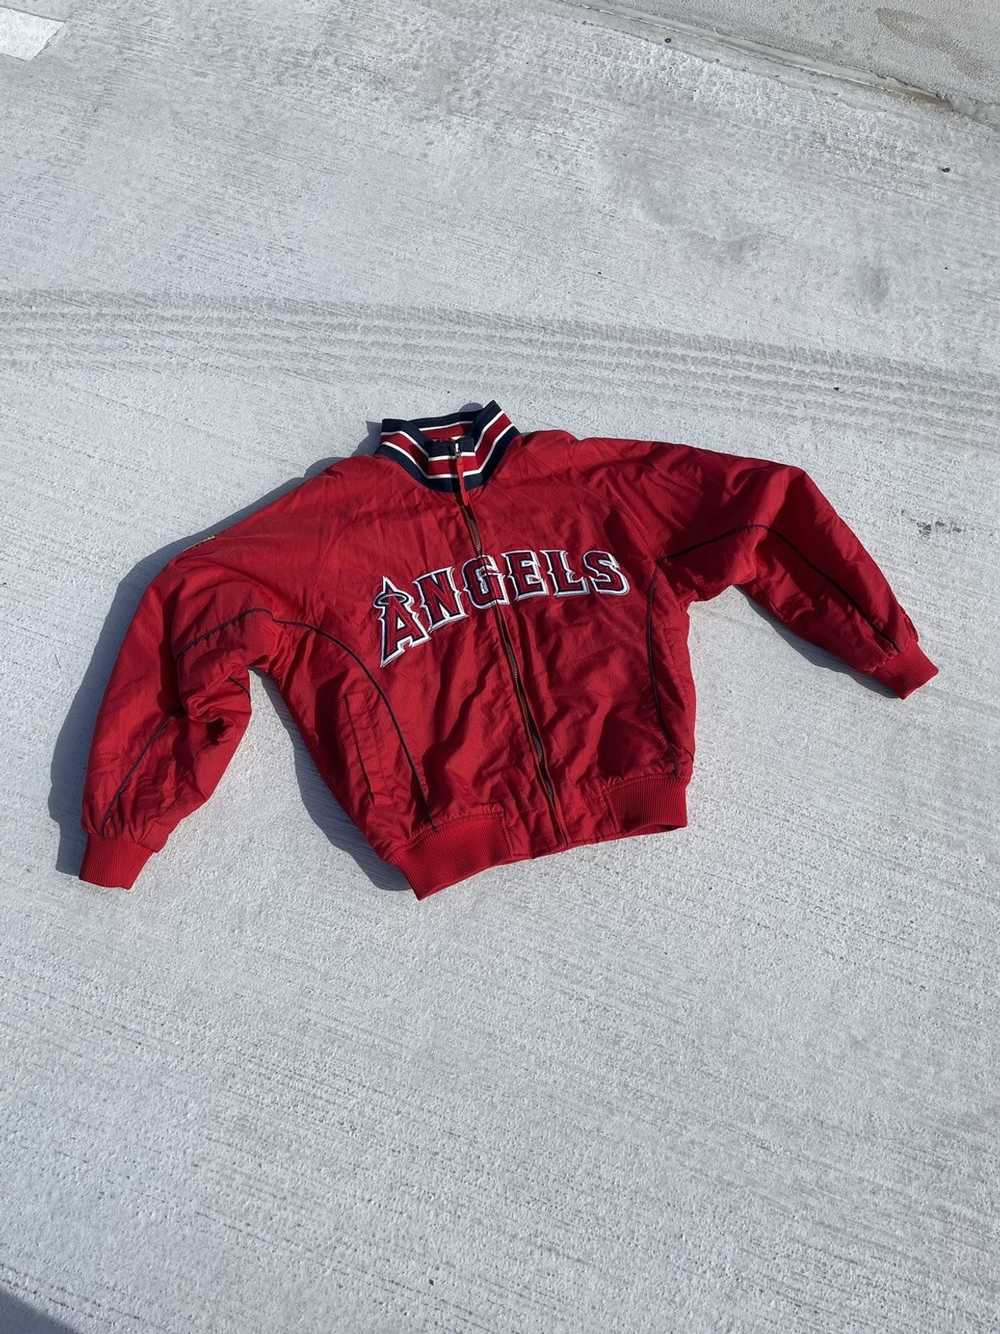 Los Angeles (Anaheim) Angels Vintage Majestic Jersey Made In USA - Men’s  Small